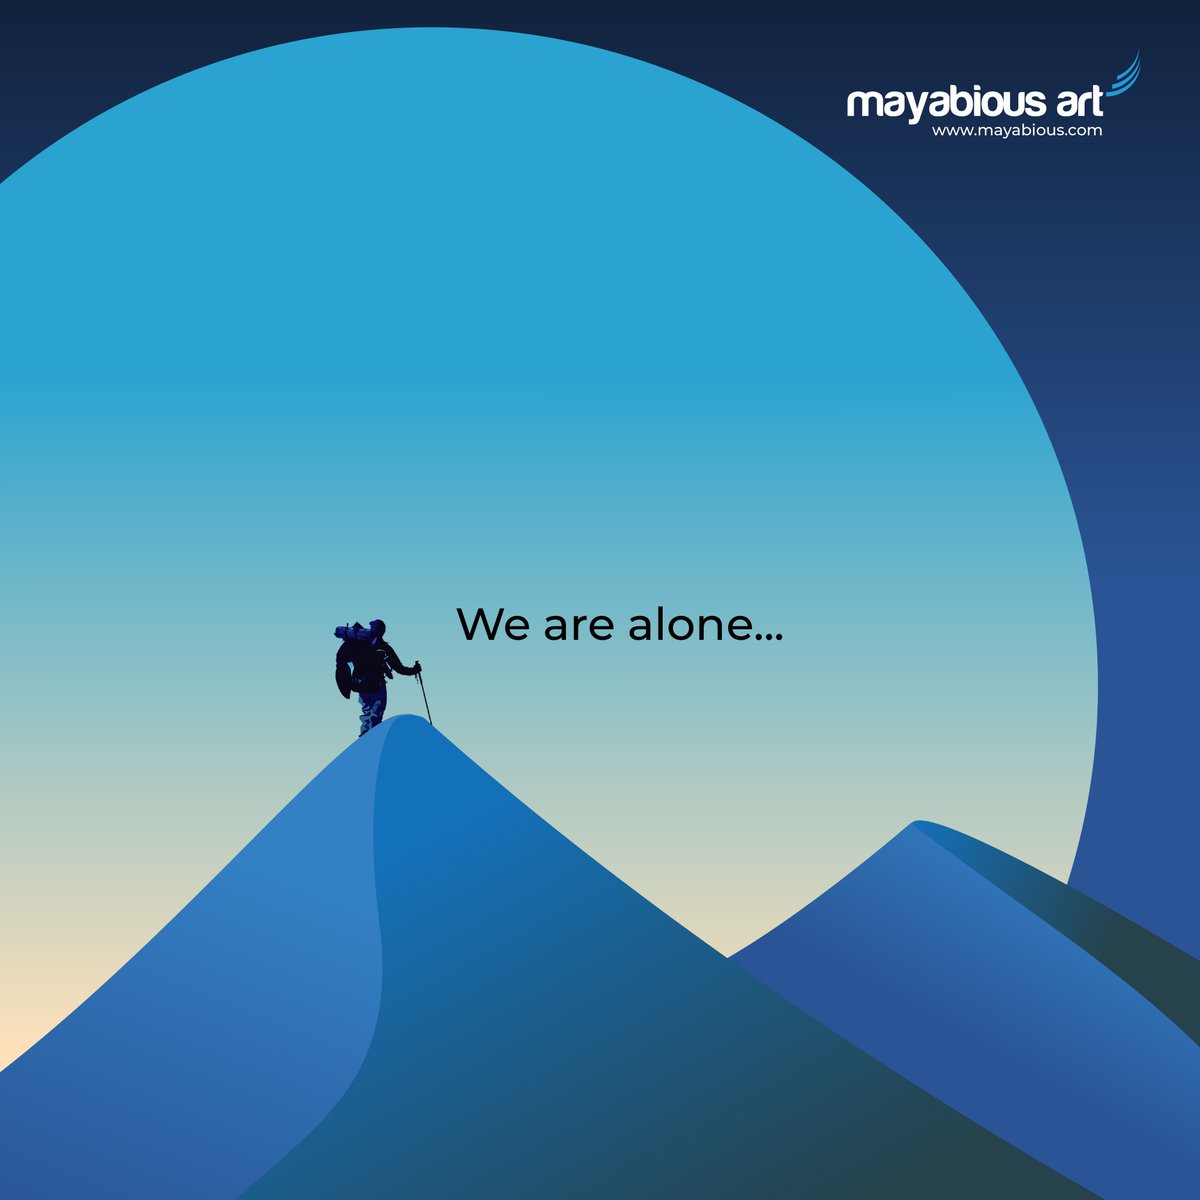 Being alone is not that bad, rather, it's best when you reach the crest.

🌐mayabious.com

#brochuredesign #creativeagencyindia #AdvertisementAgency #scalemodels #AugmentedReality #vr #3dwalkthrough #3dvisualization #3d #mayabiousgroup